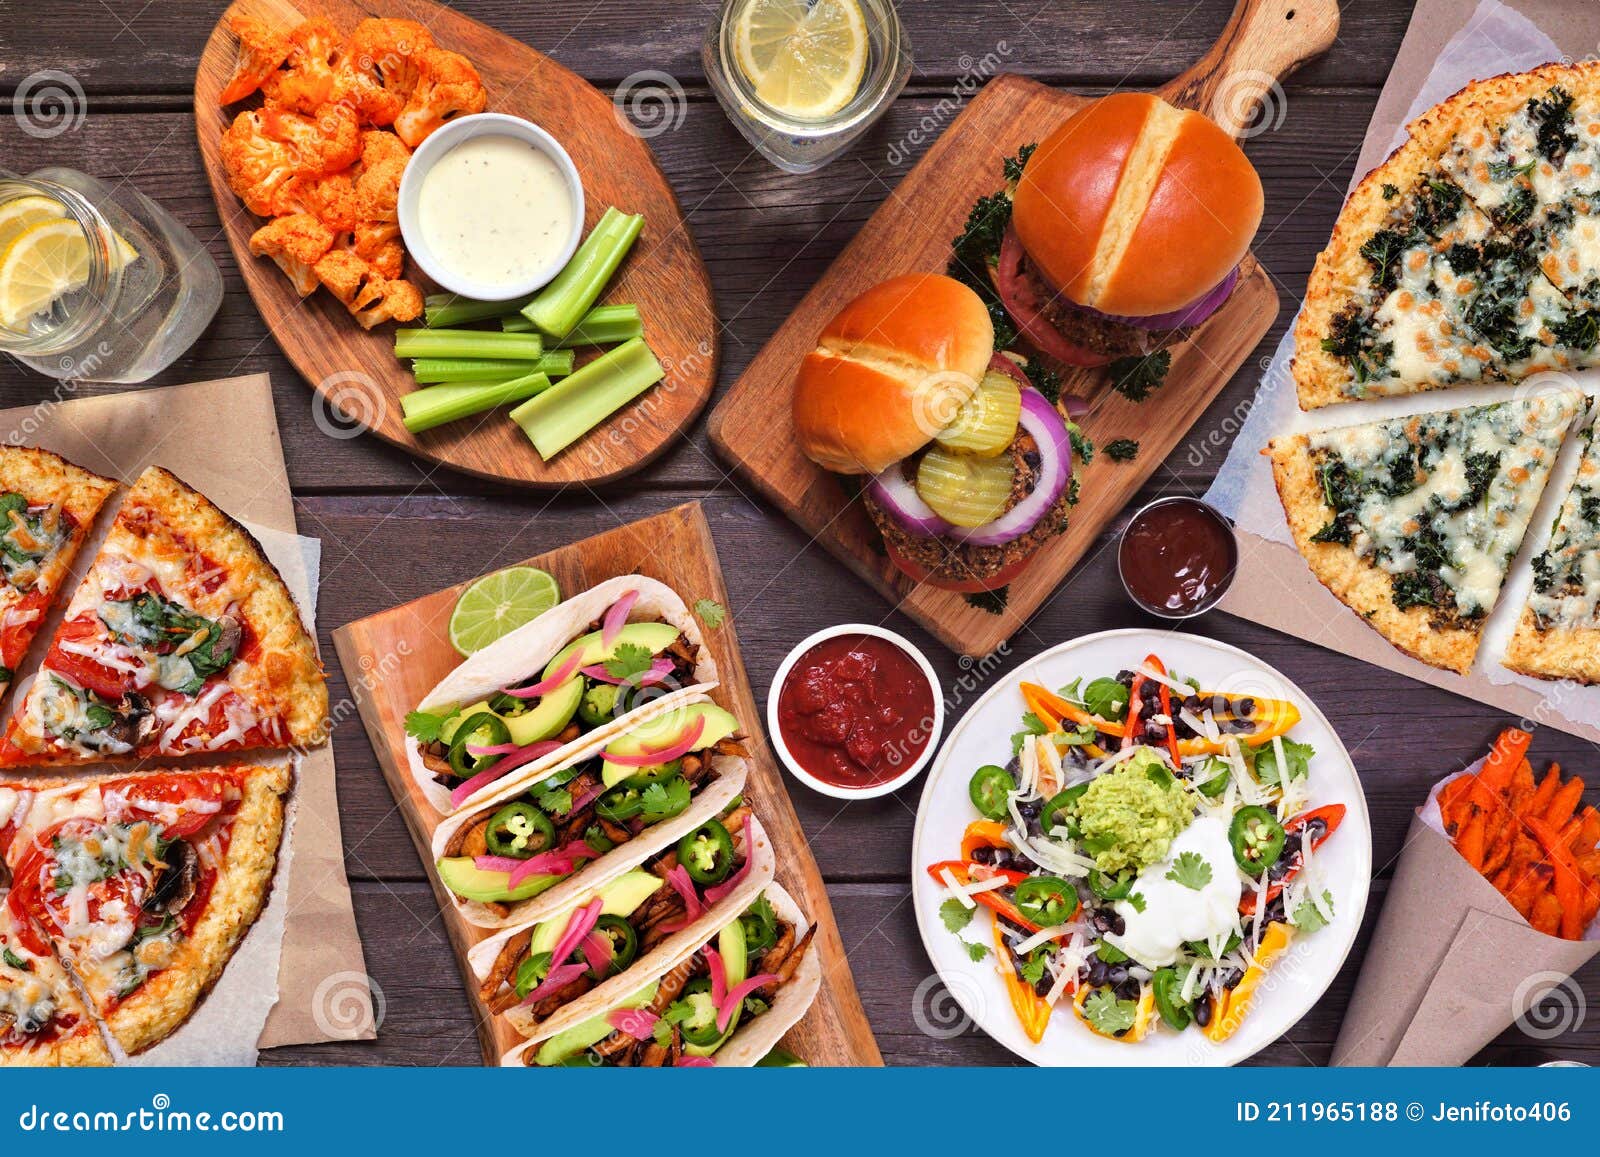 healthy plant based fast food table scene. overhead view on a wood background.